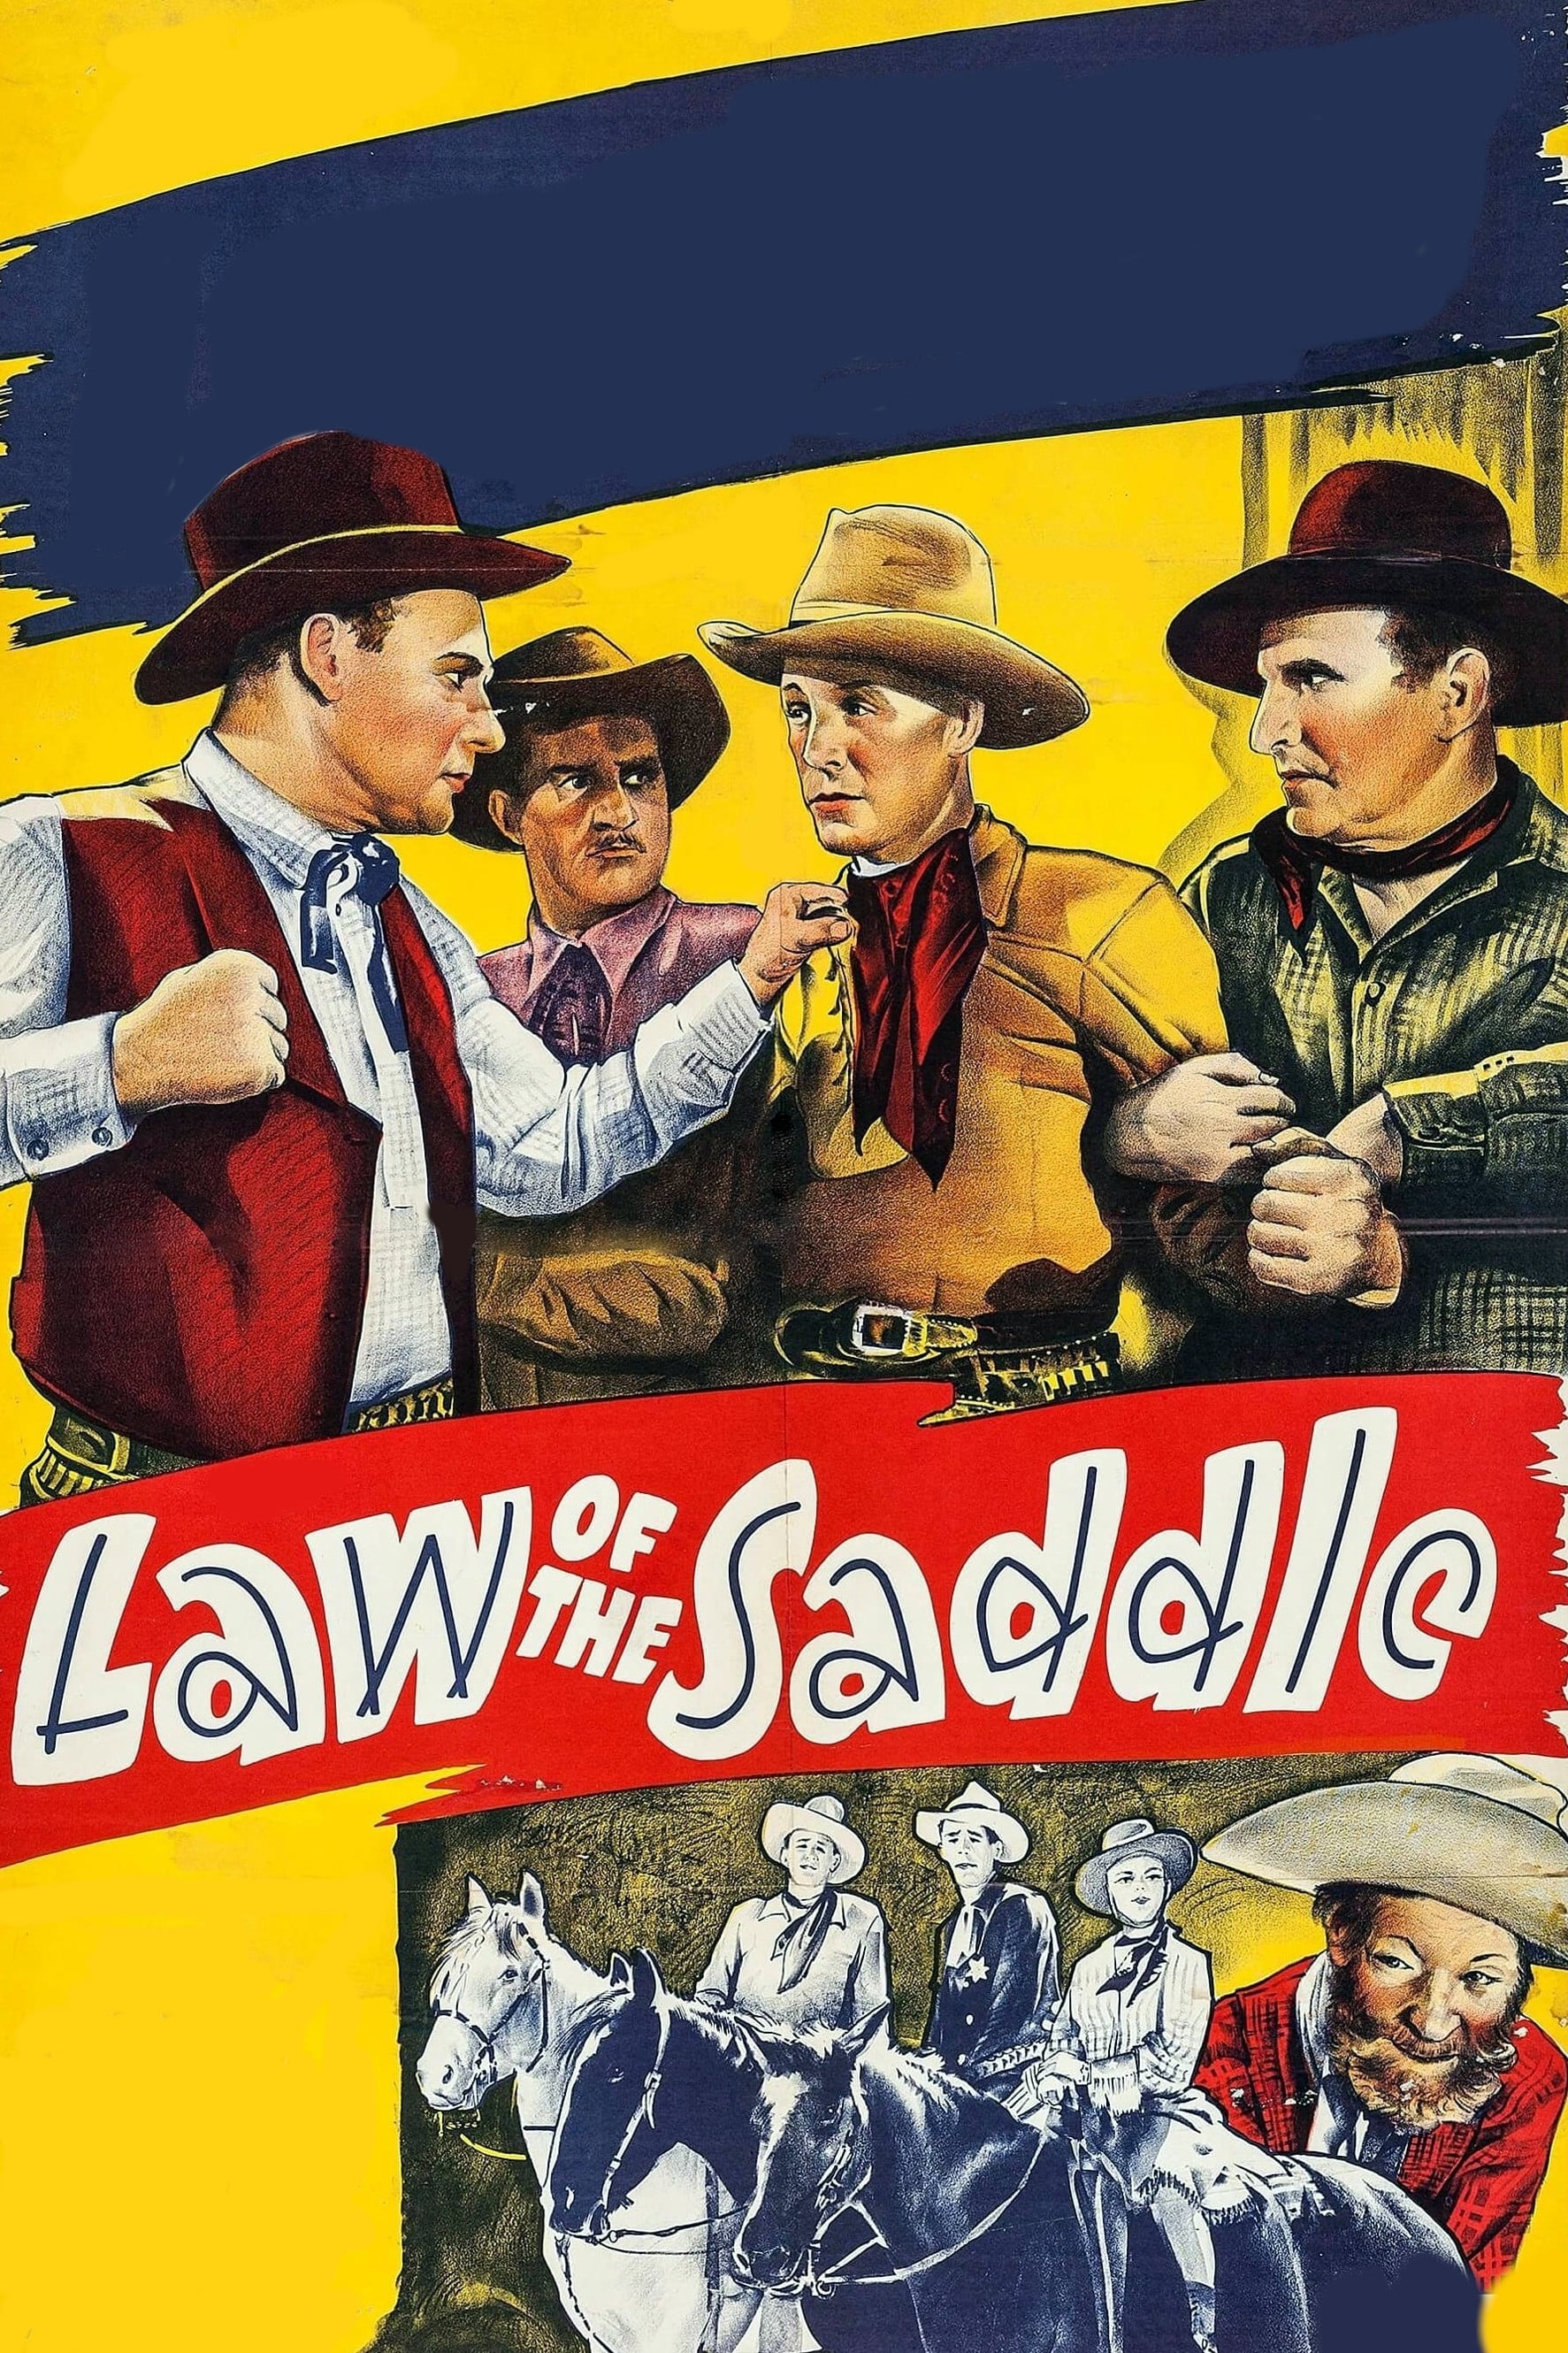 Law of the Saddle (1943)